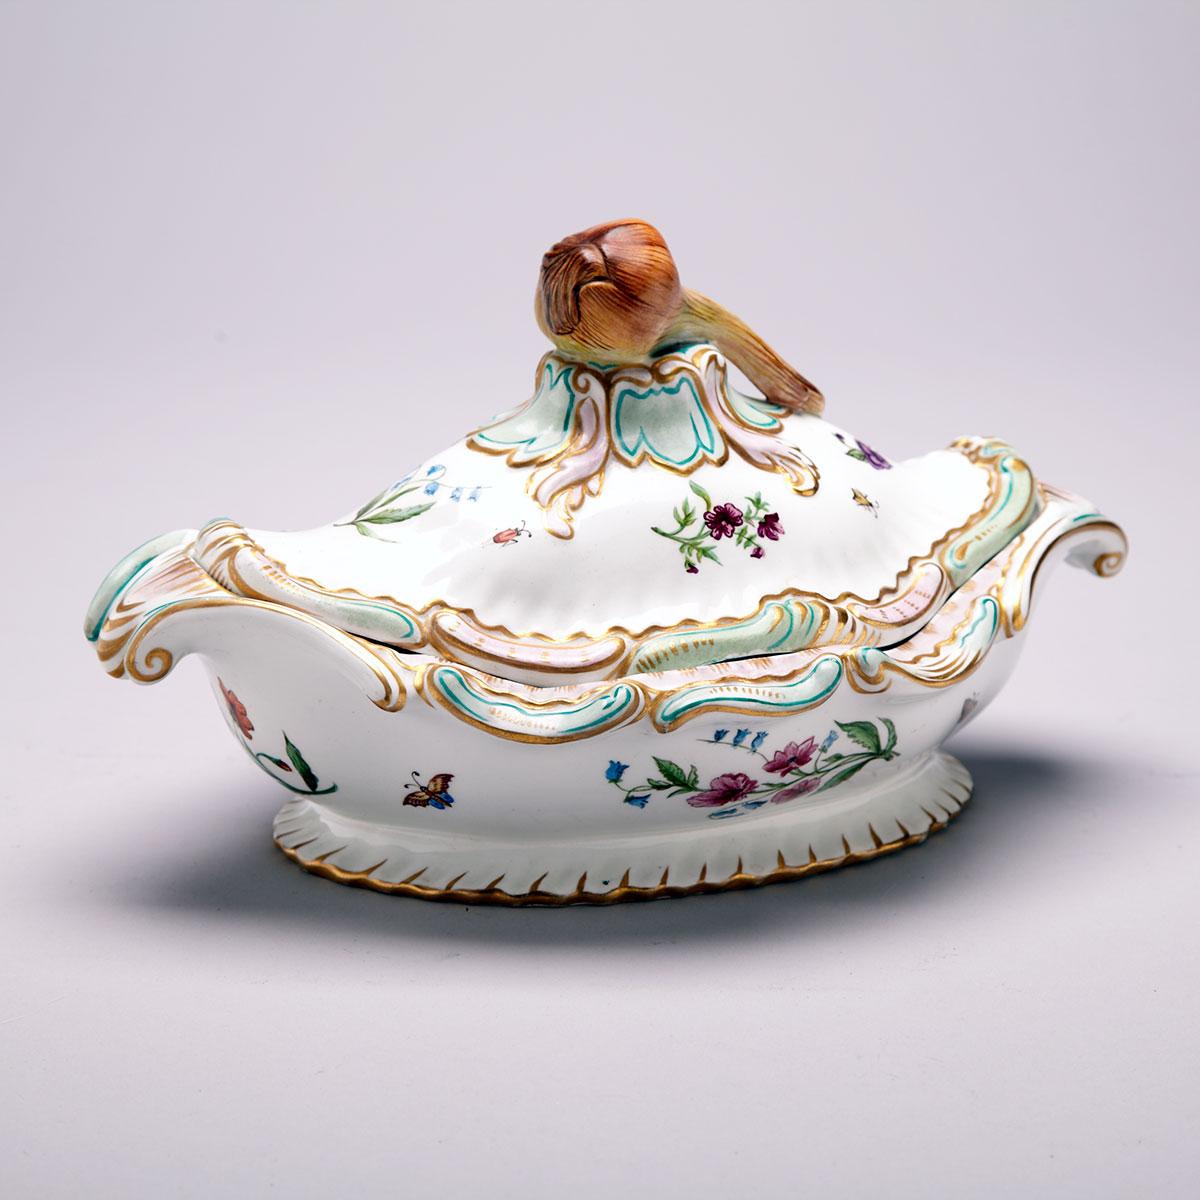 Joseph (Guiseppe) Devers Faience Oval Covered Dish, third quarter of the 19th century